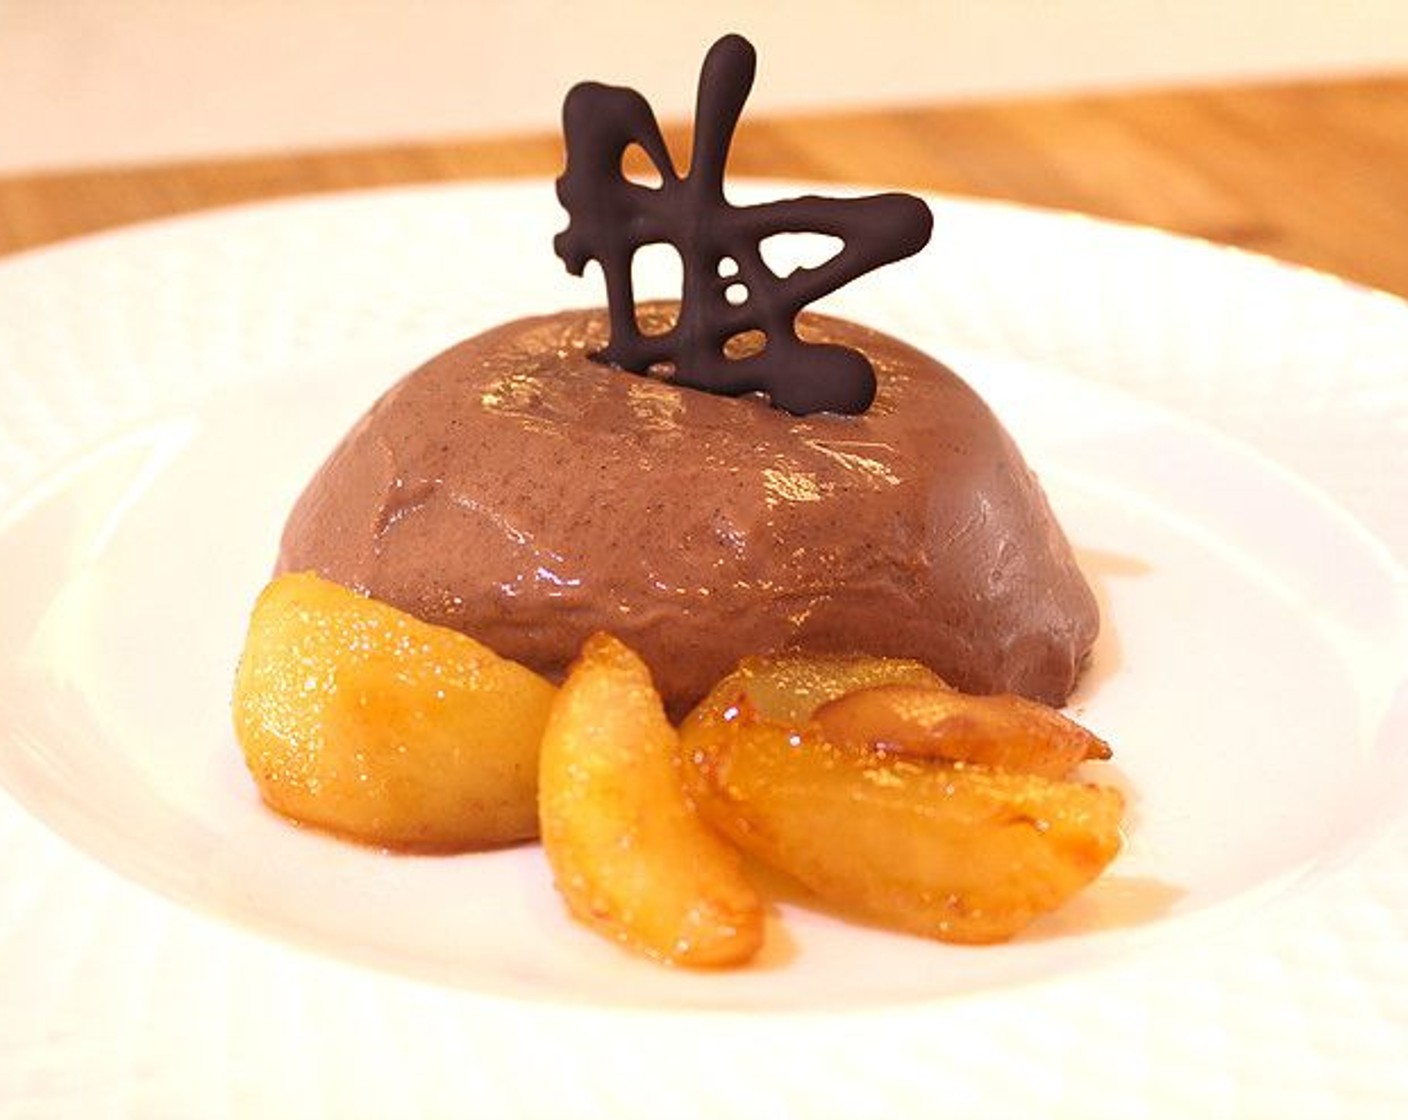 Chocolate Panna Cotta with Caramelized Pears & Hazelnut Cookies